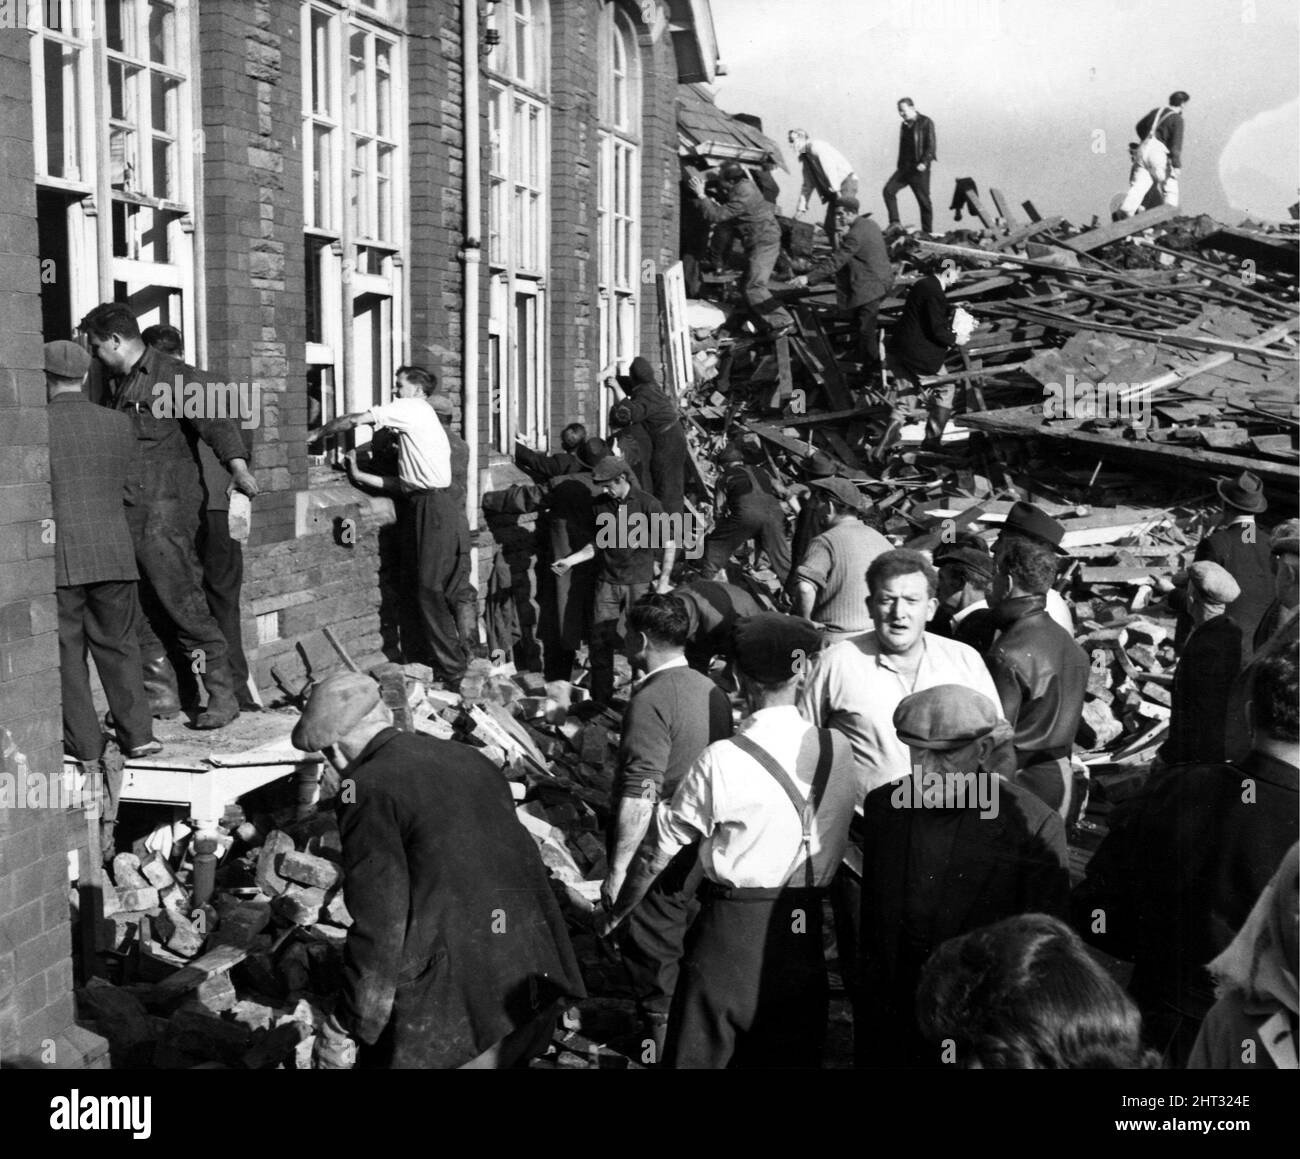 Aberfan - Landslide - Disaster - The school that died in a sea of mud - rescue workers break into the school in their search for survivors - 21st Oct 1966 Stock Photo